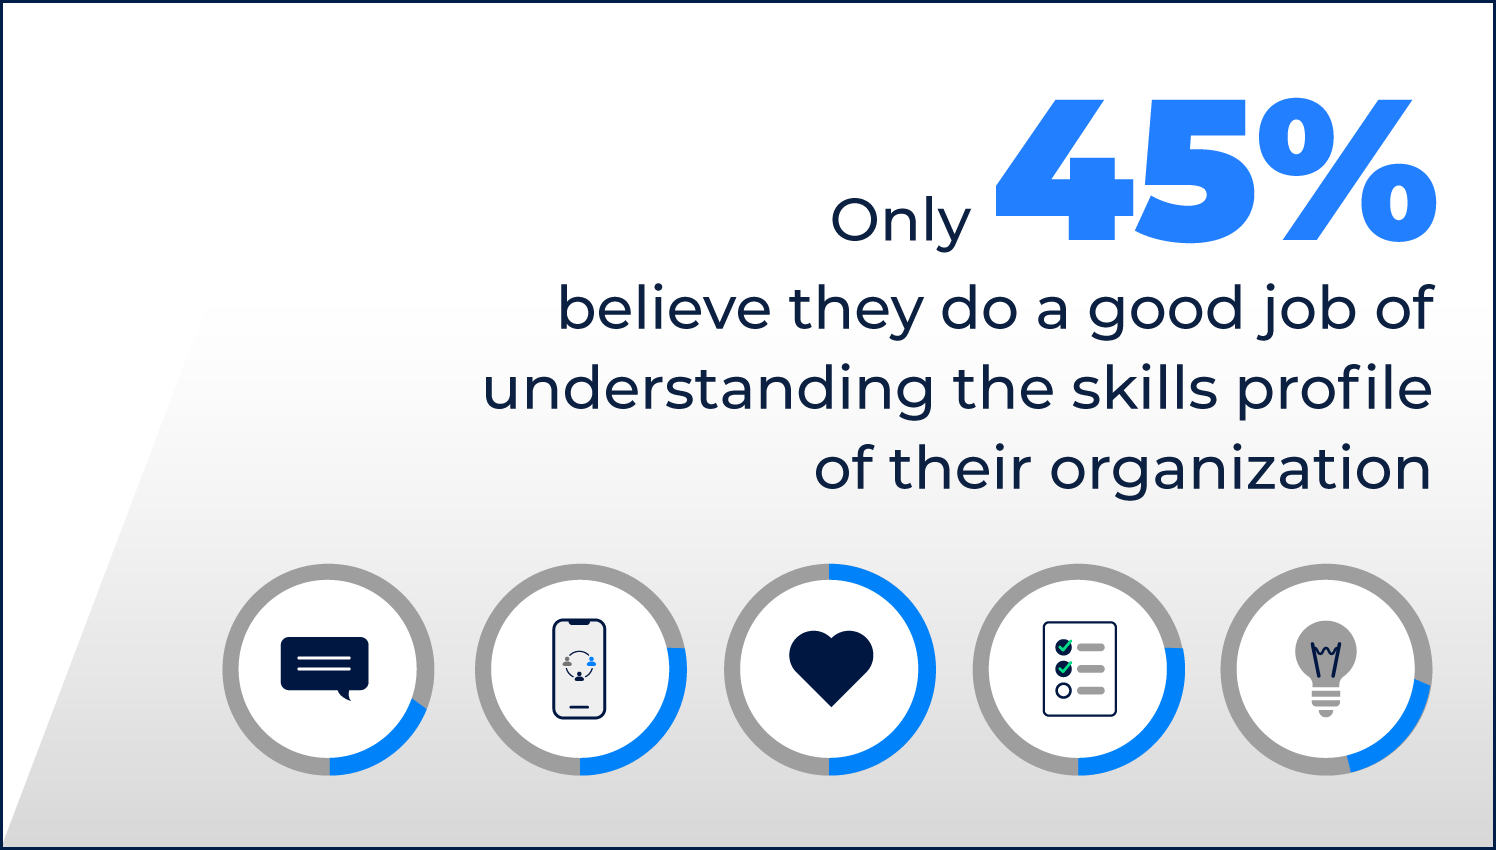 The results from a Fosway report showcasing that 45% of organizations understand the skills profile of their organization.